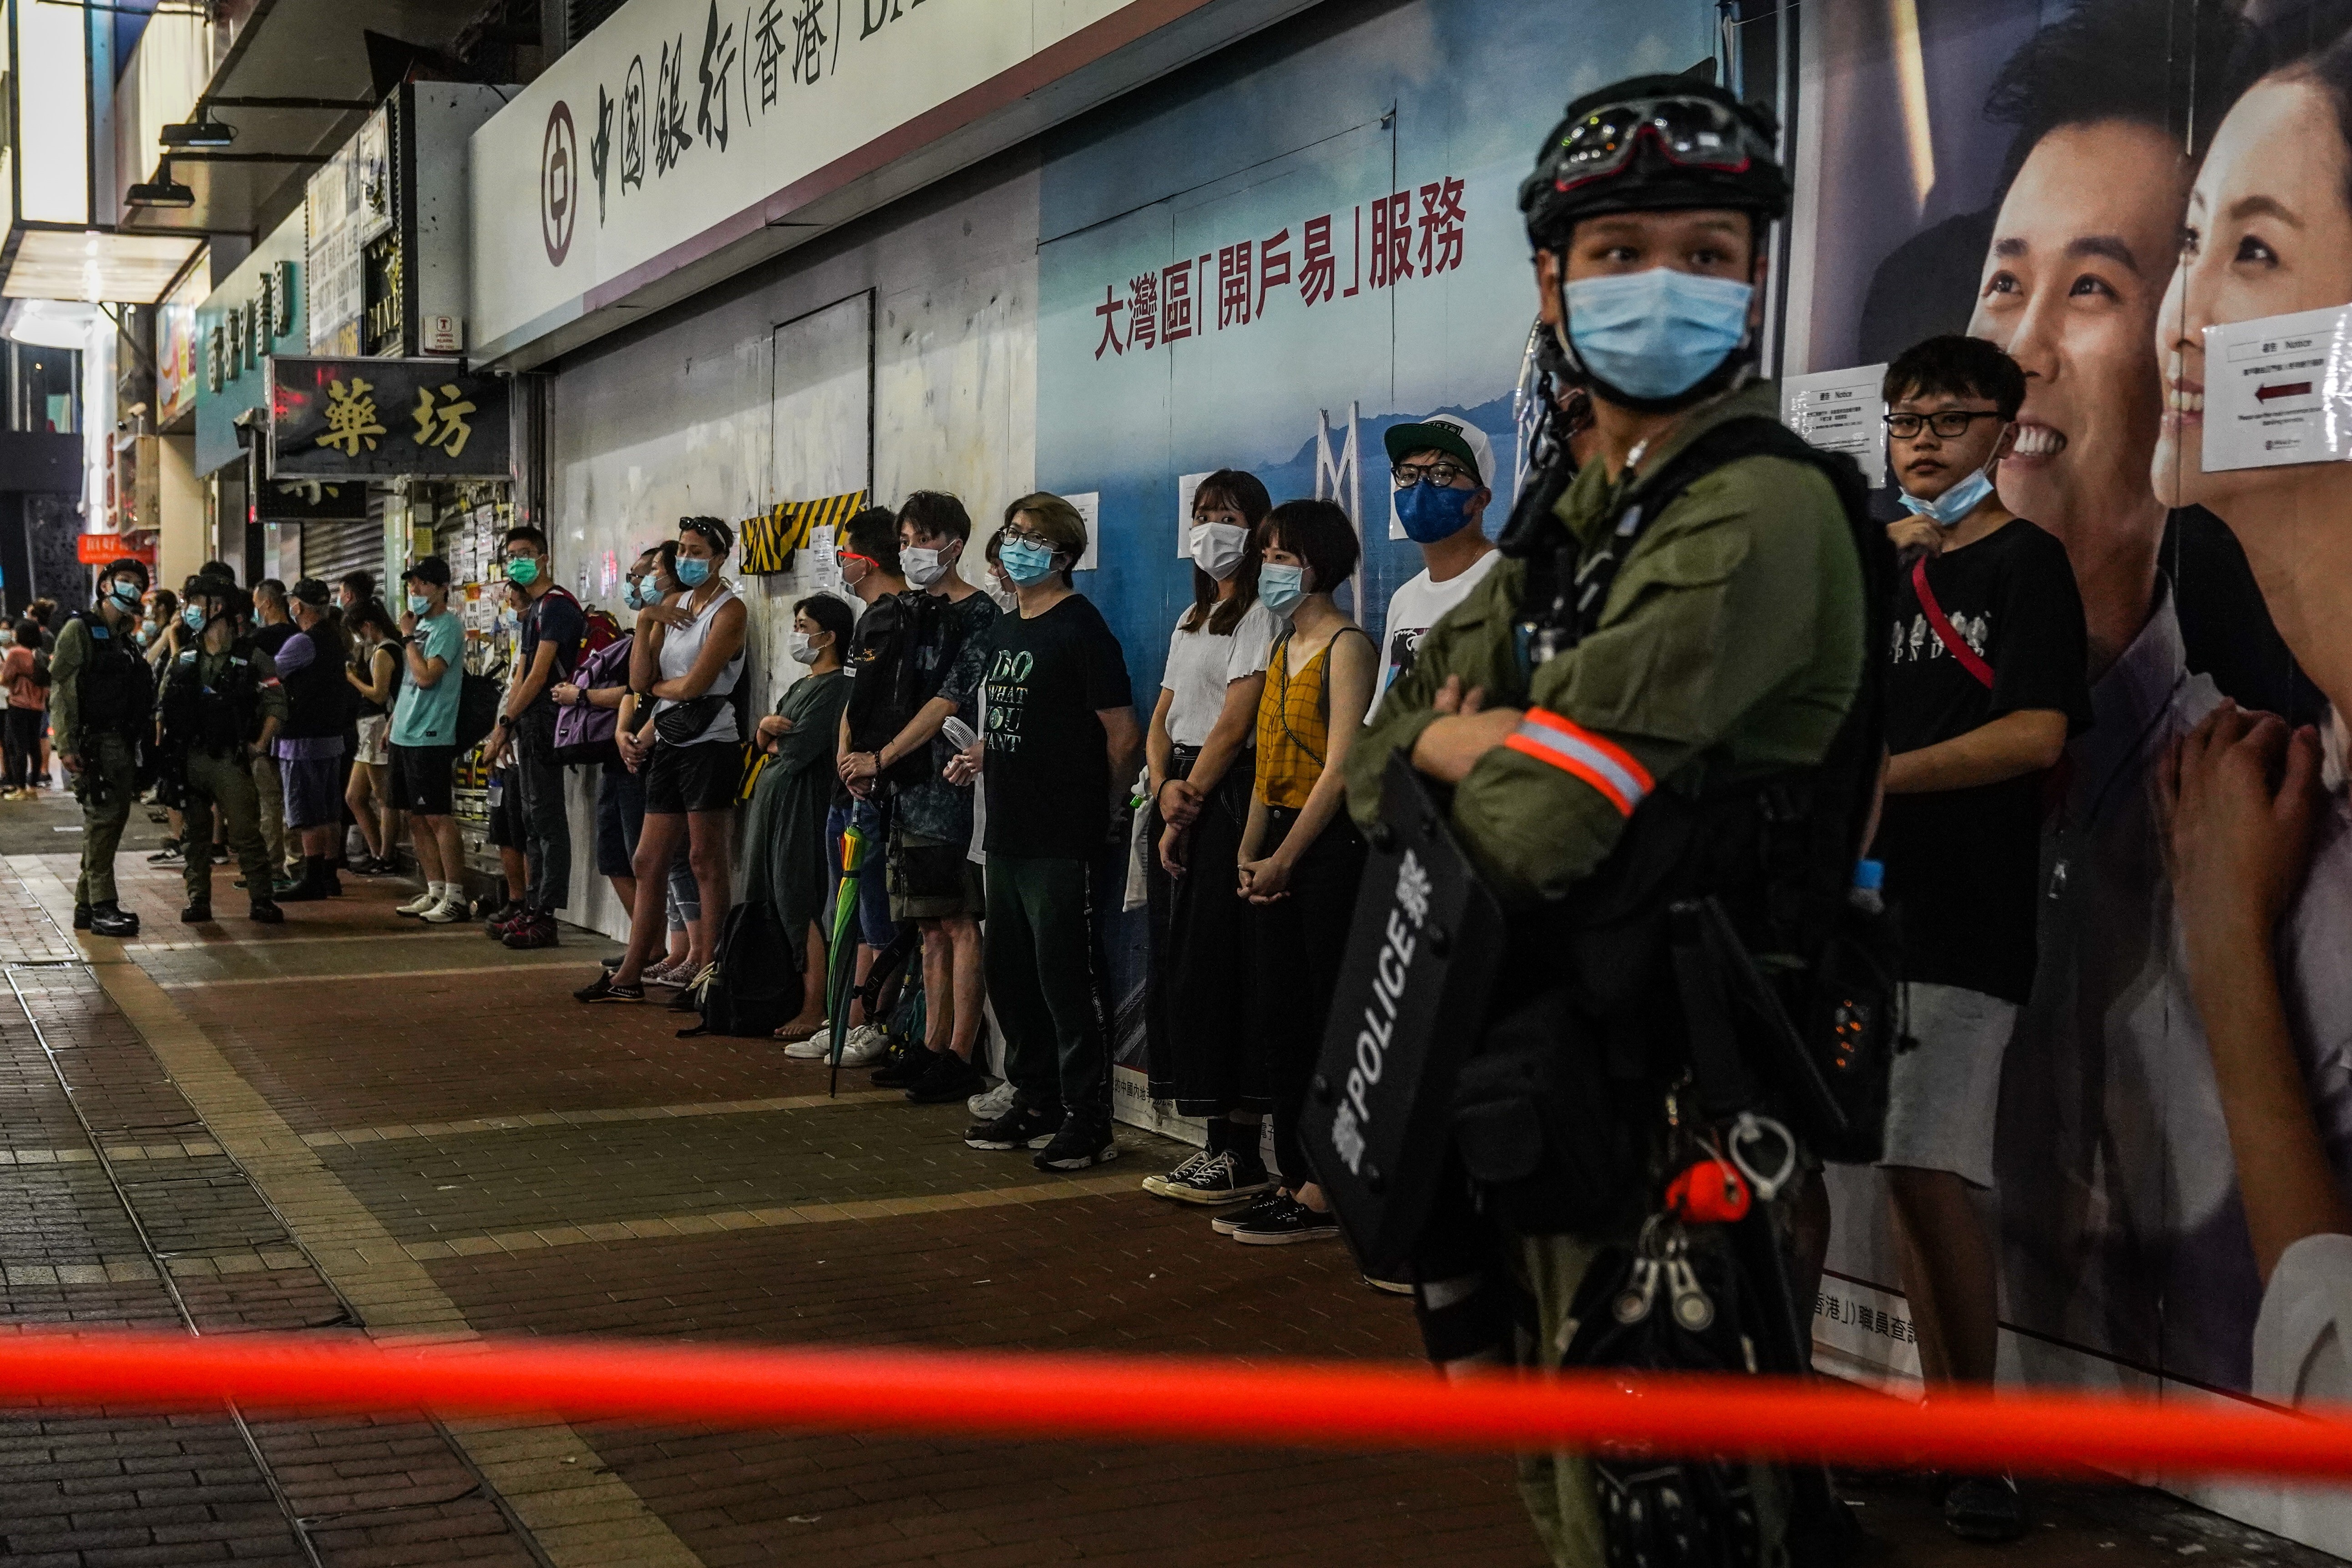 People stand in line wearing protective face masks as they are stopped and searched by riot police during a protest in Hong Kong. Photo: Bloomberg